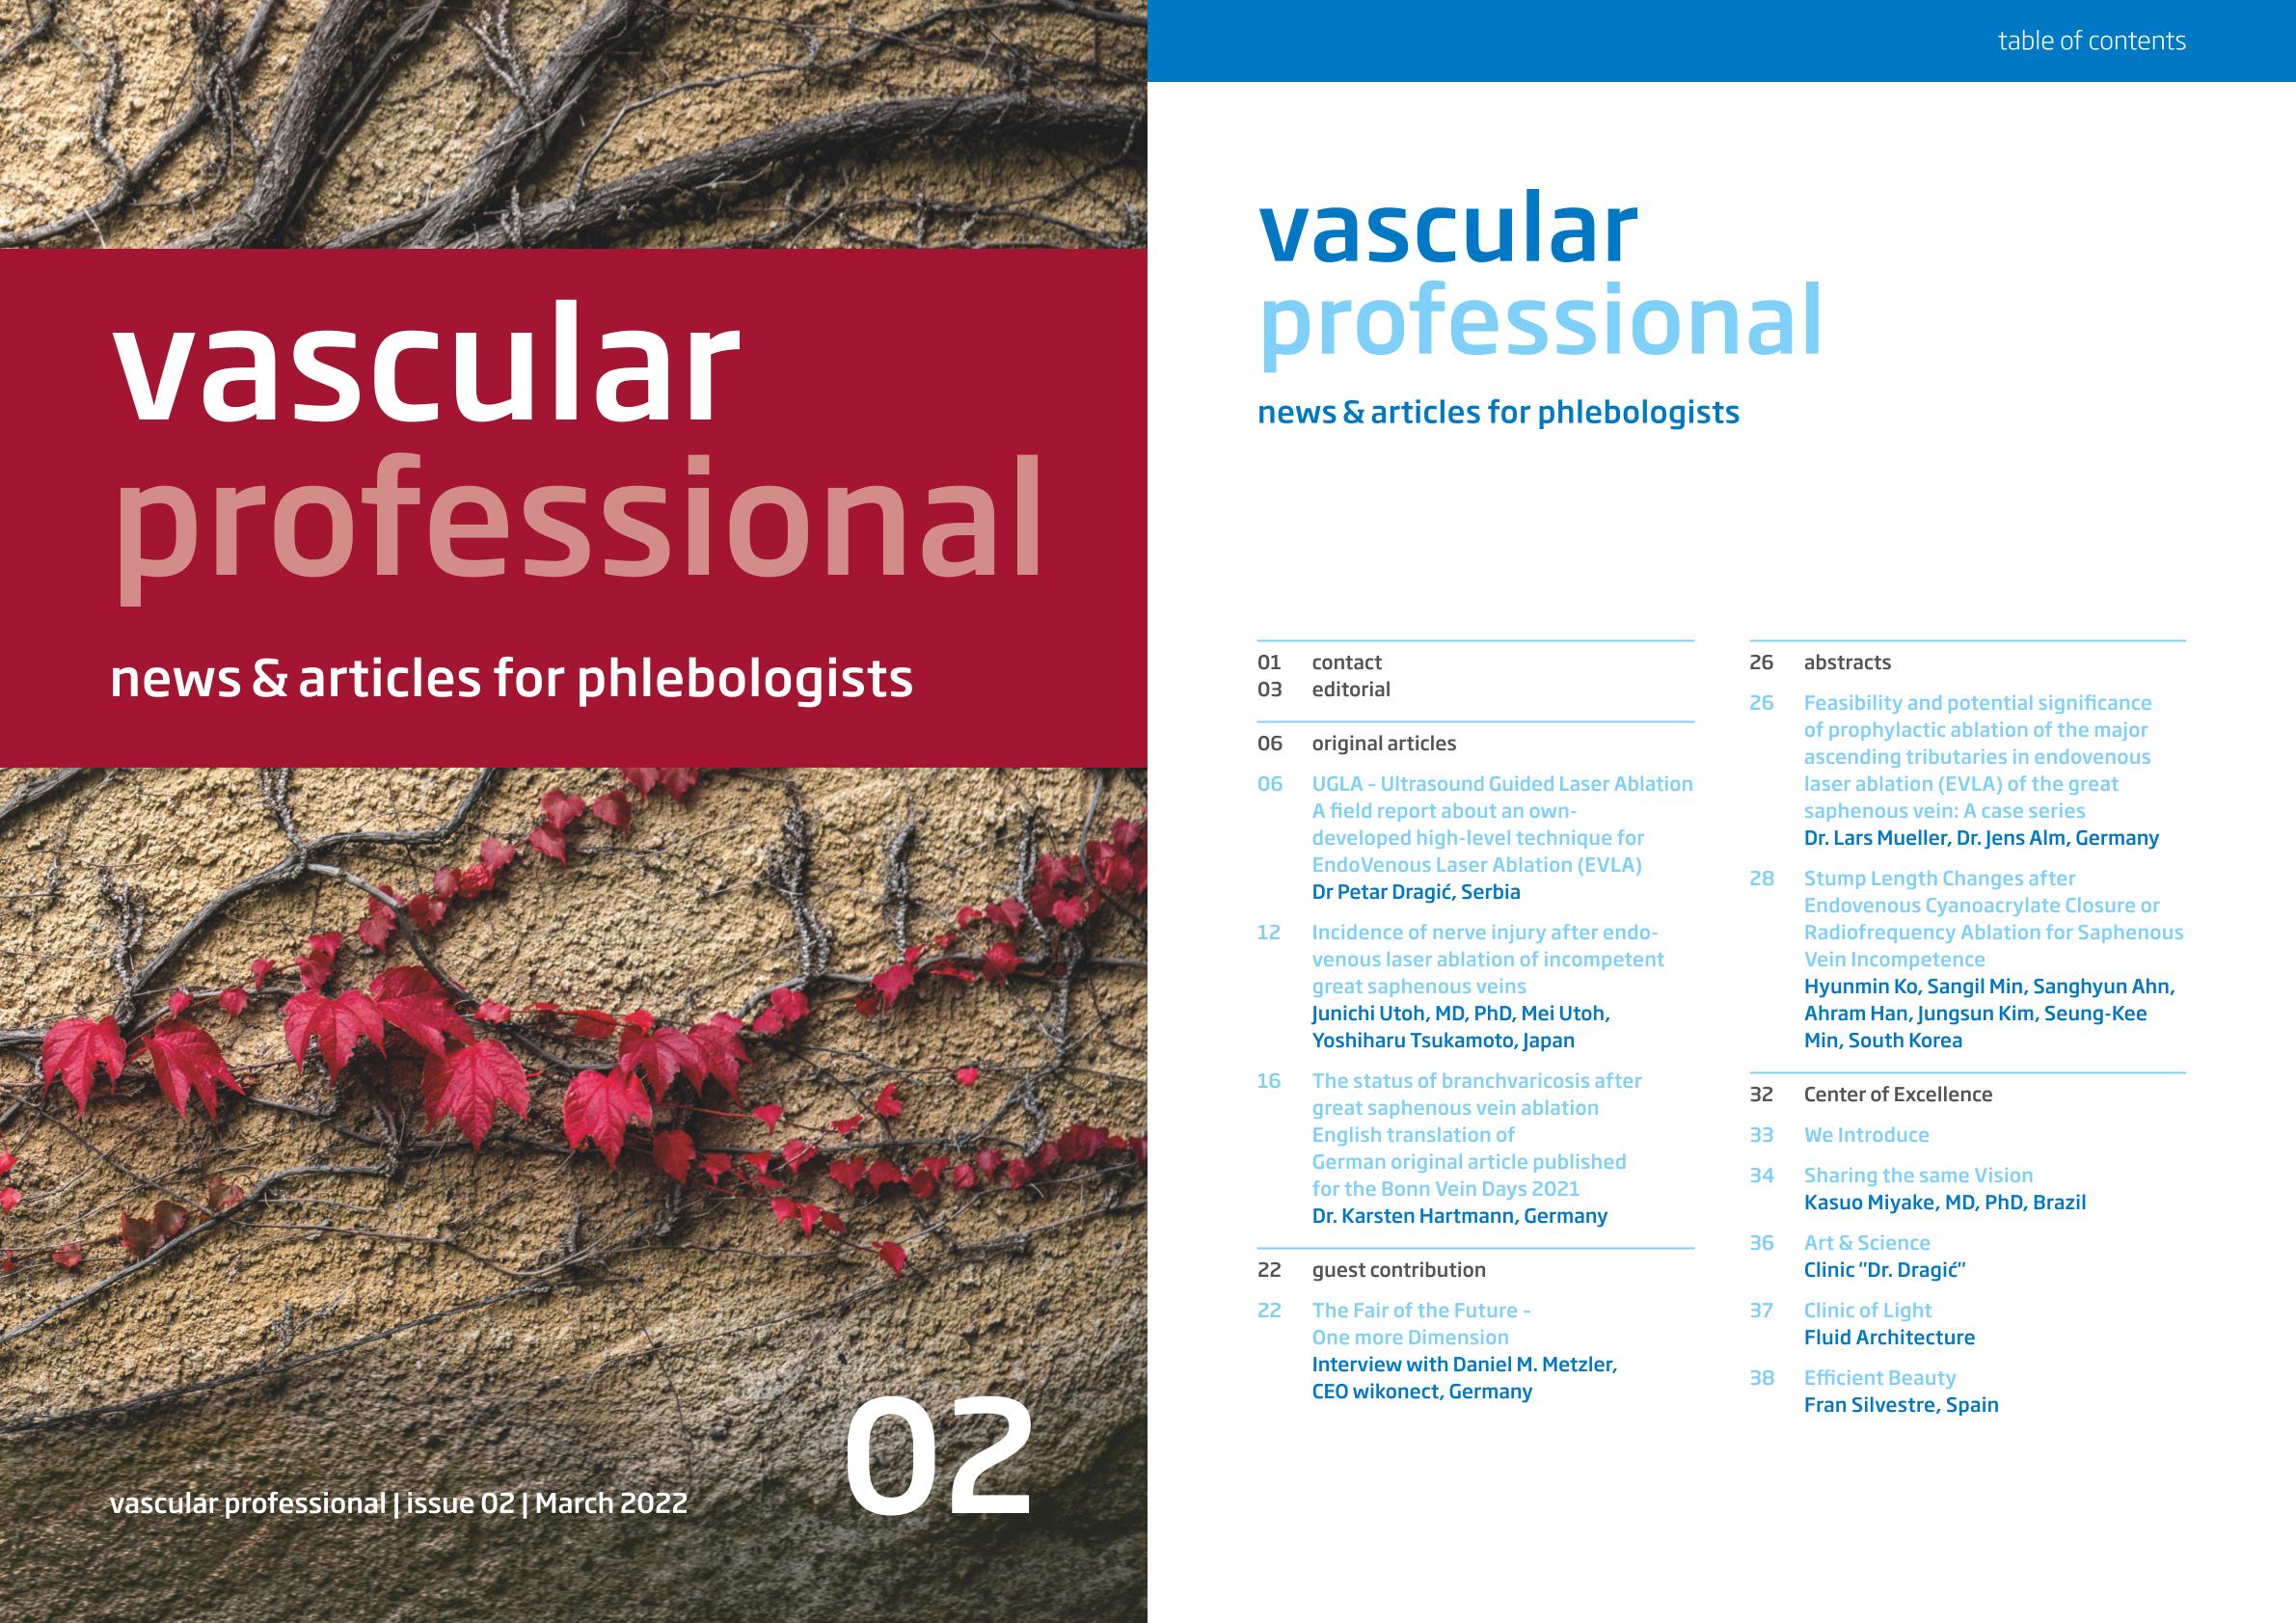 Specialist magazine vascular professional Vol.II presents field reports from high professionals on modern vein therapy